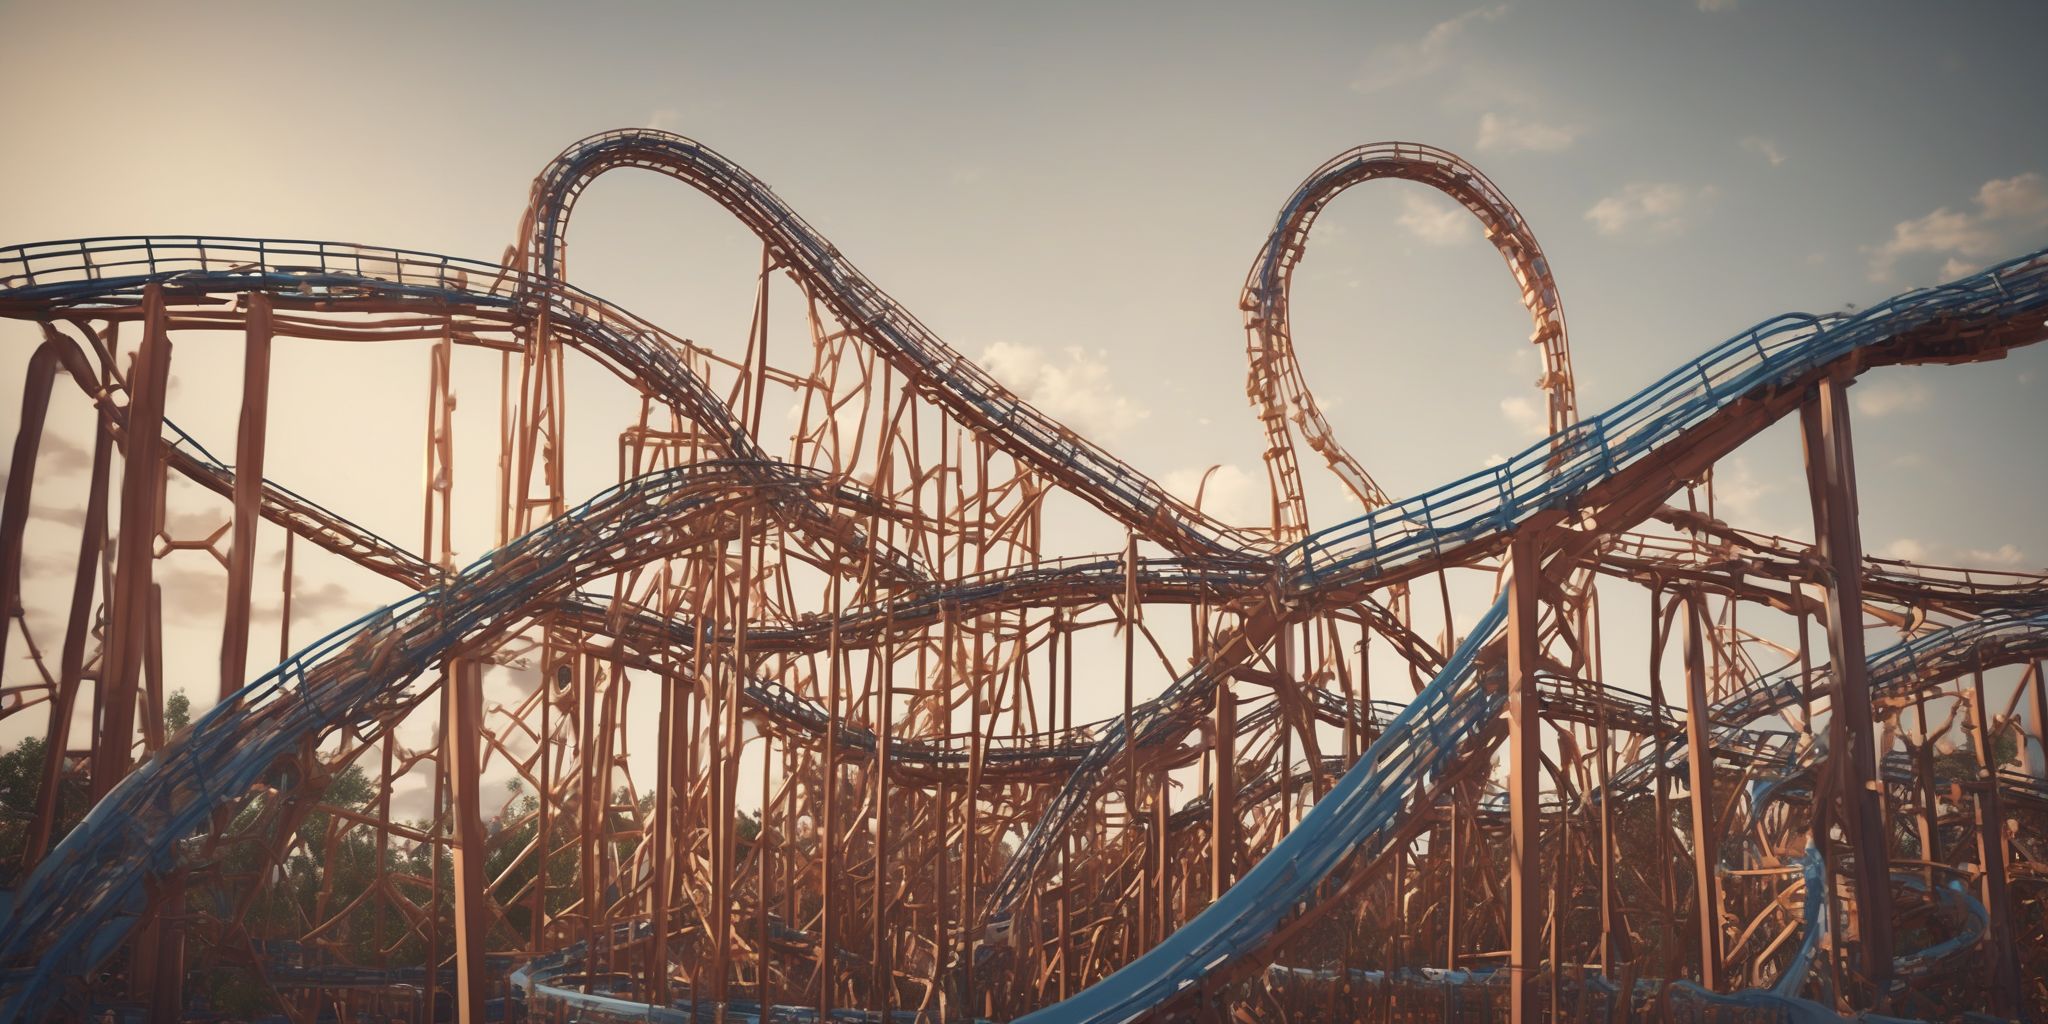 Roller coaster  in realistic, photographic style